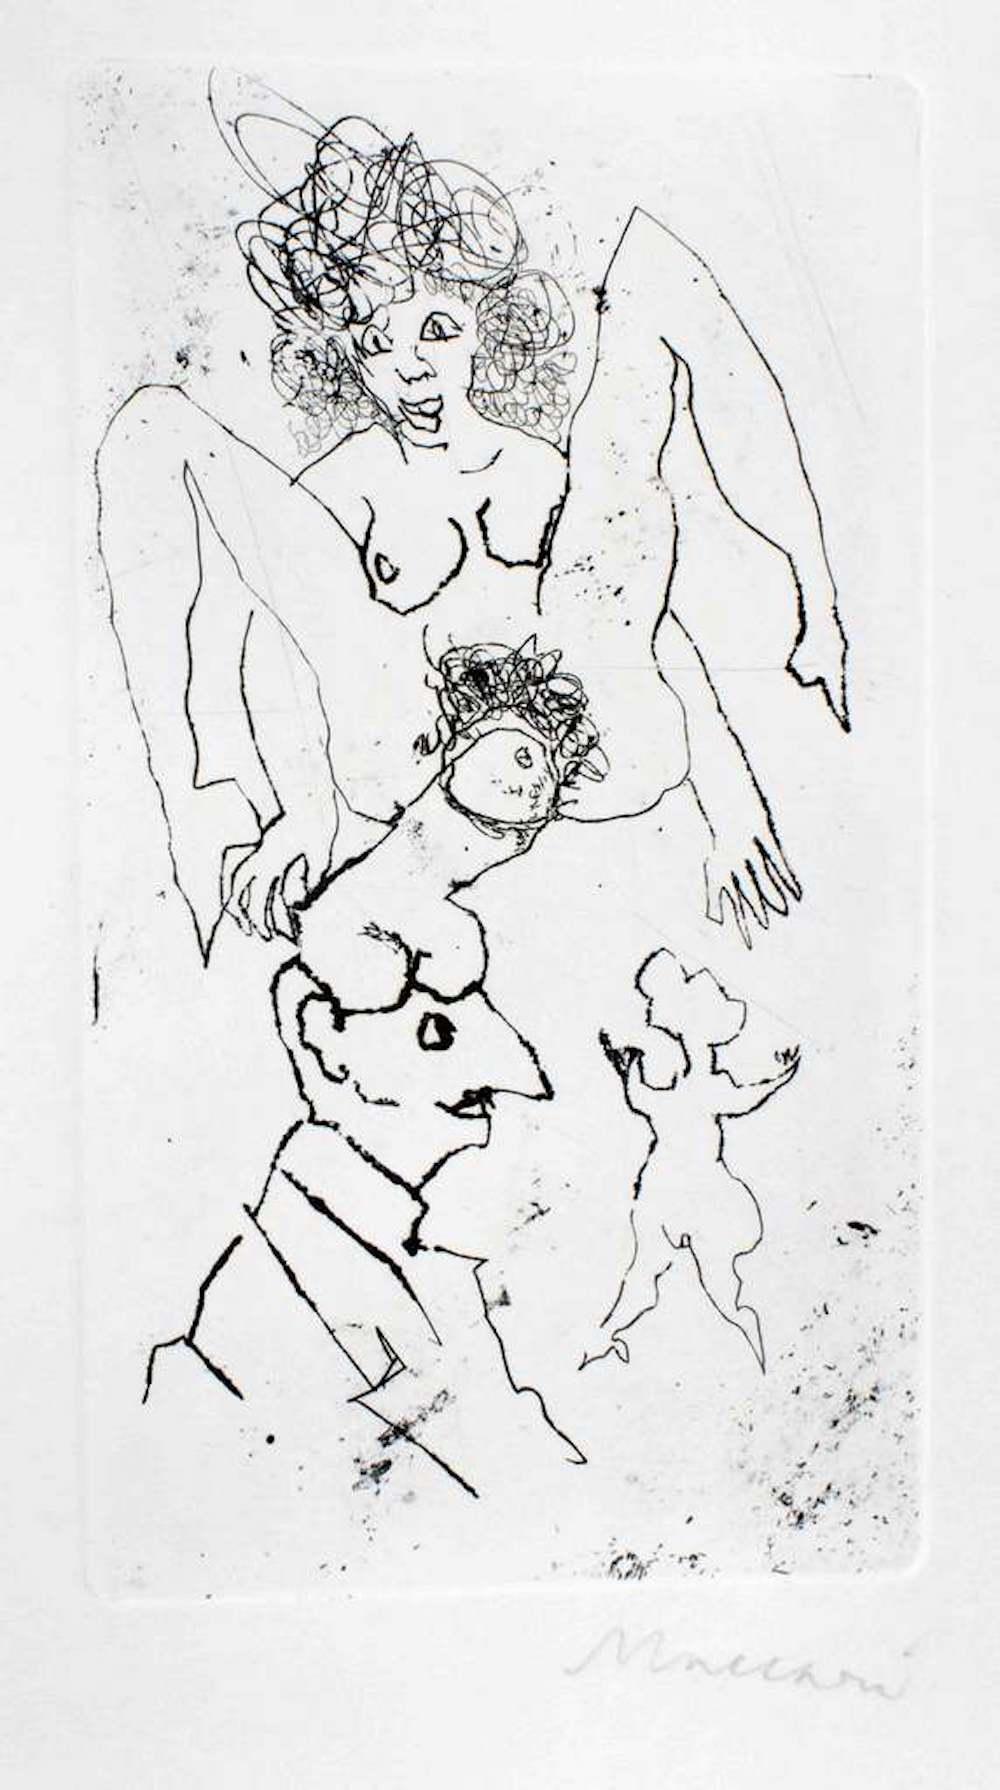 Sexual - Original Etching and Drypoint by Mino Maccari - 1960s